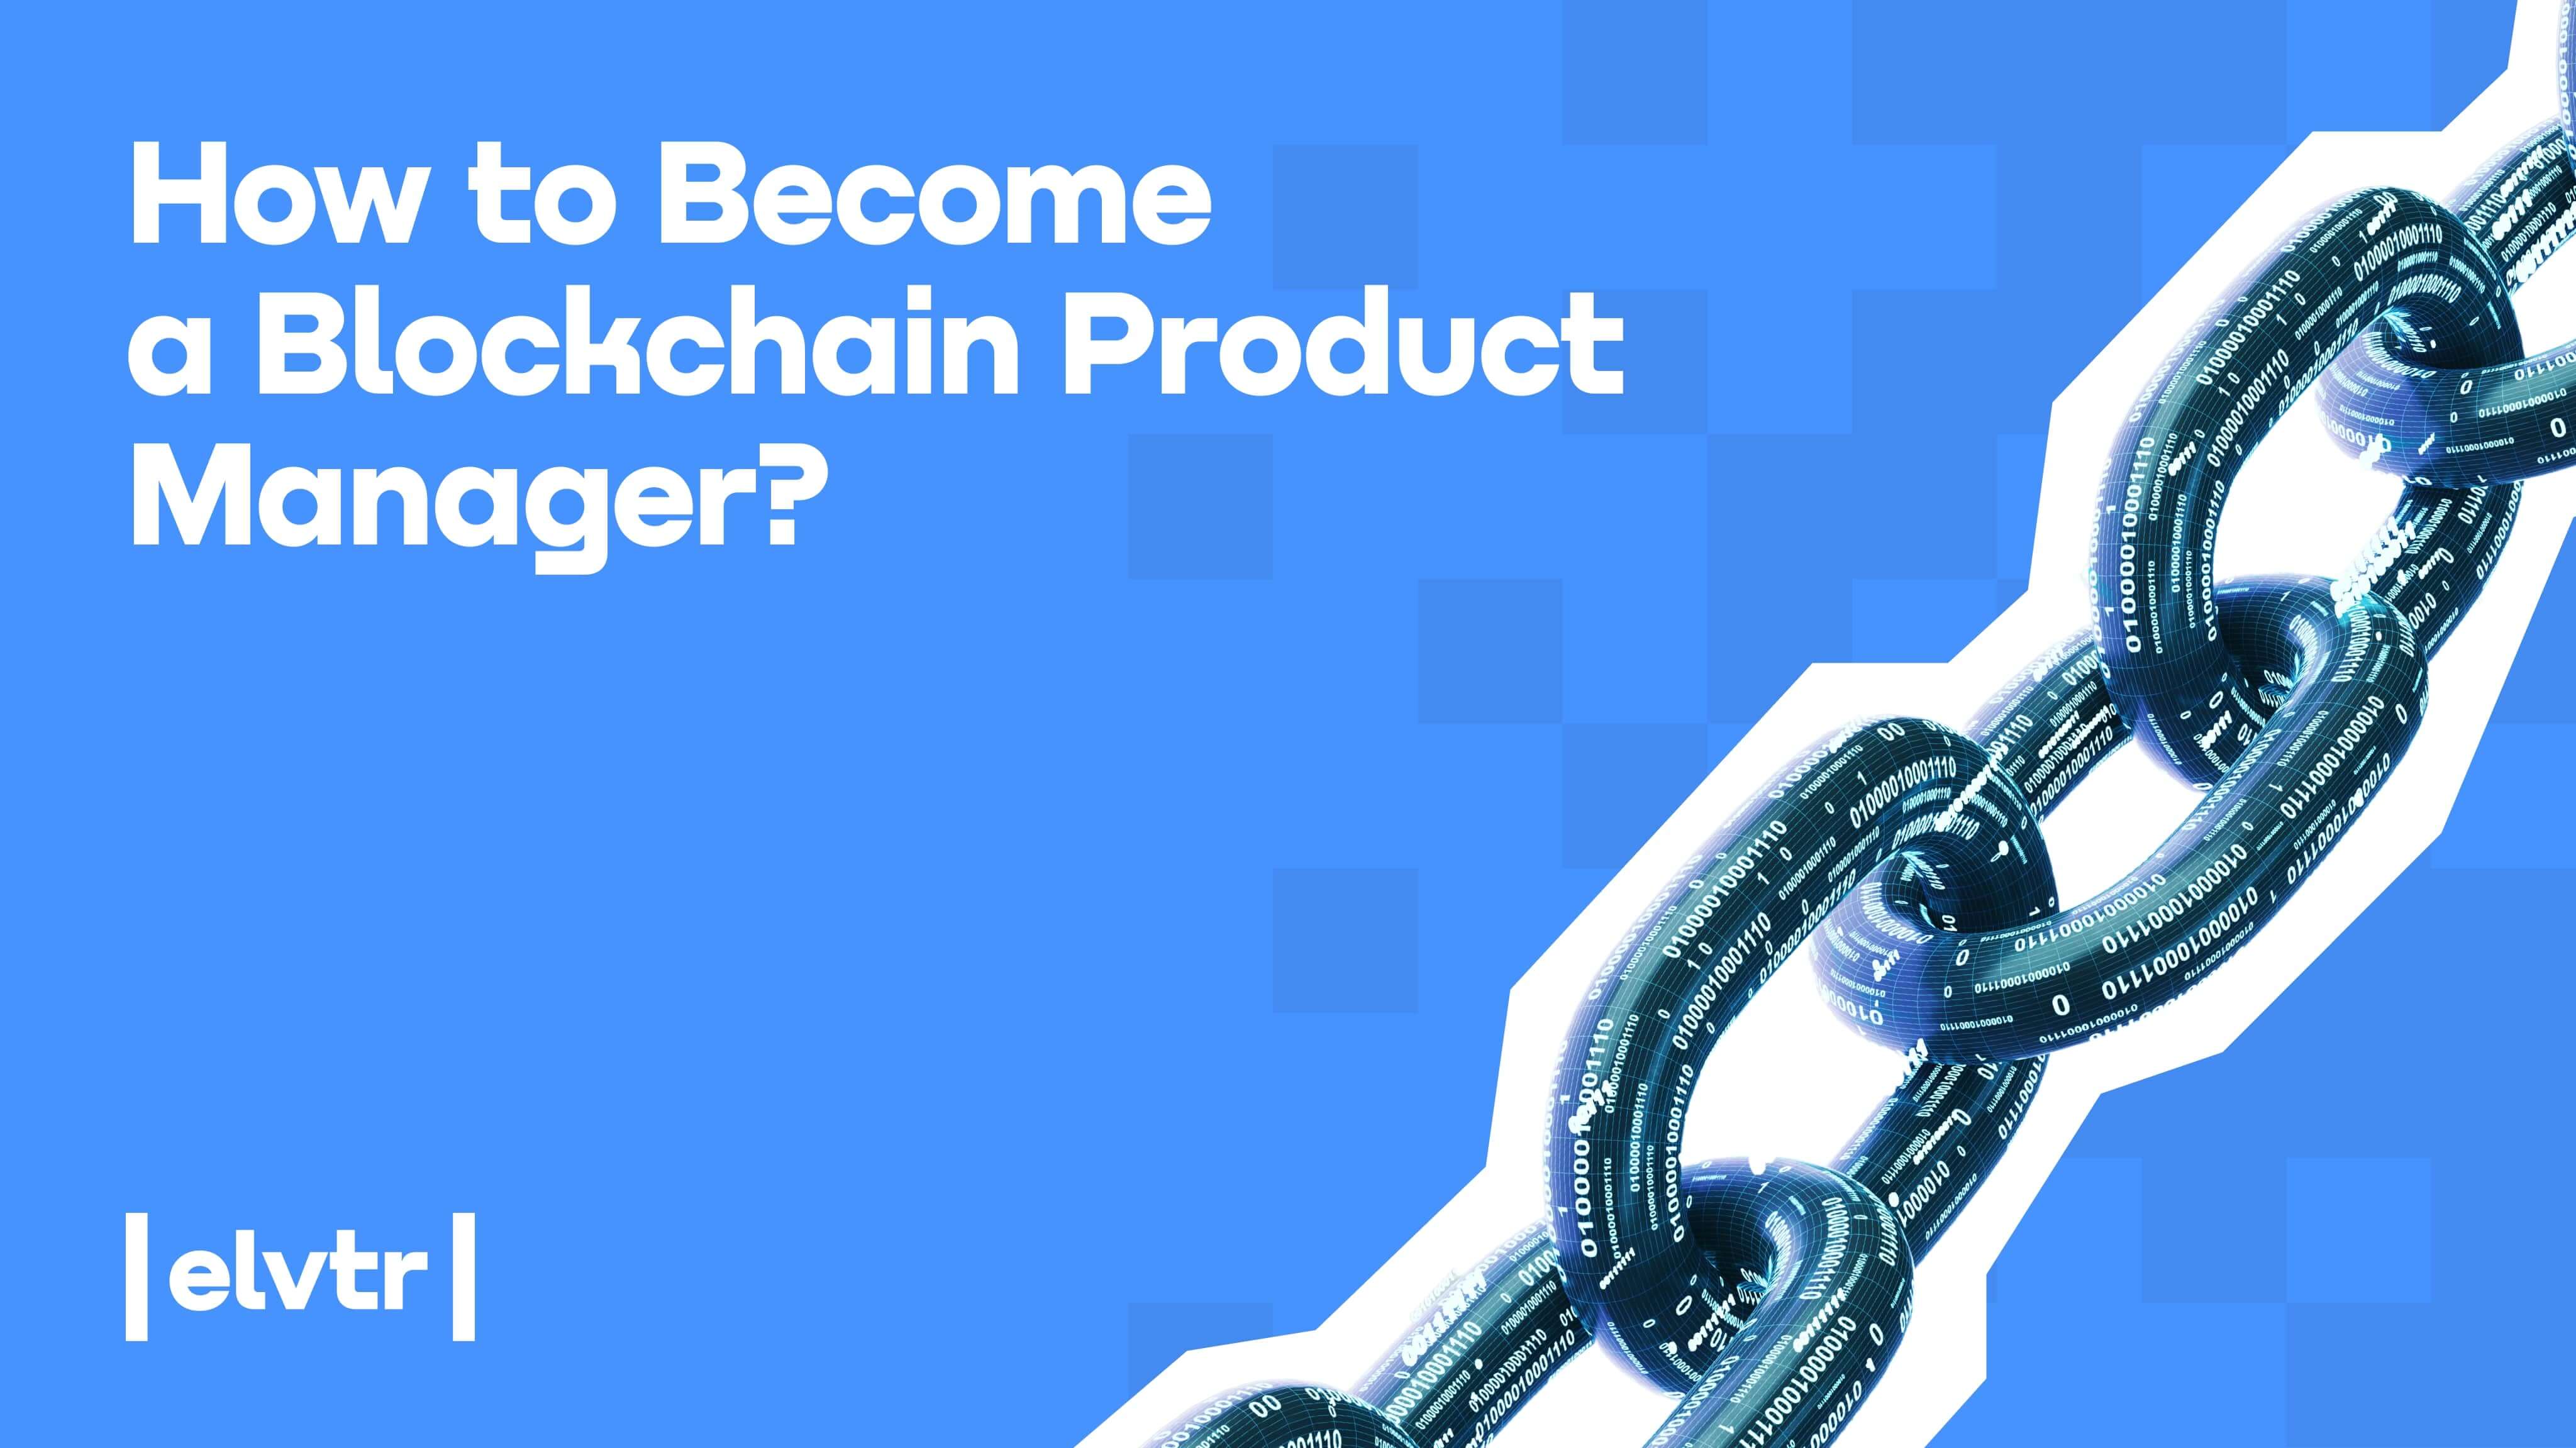 How to Become a Blockchain Product Manager? image